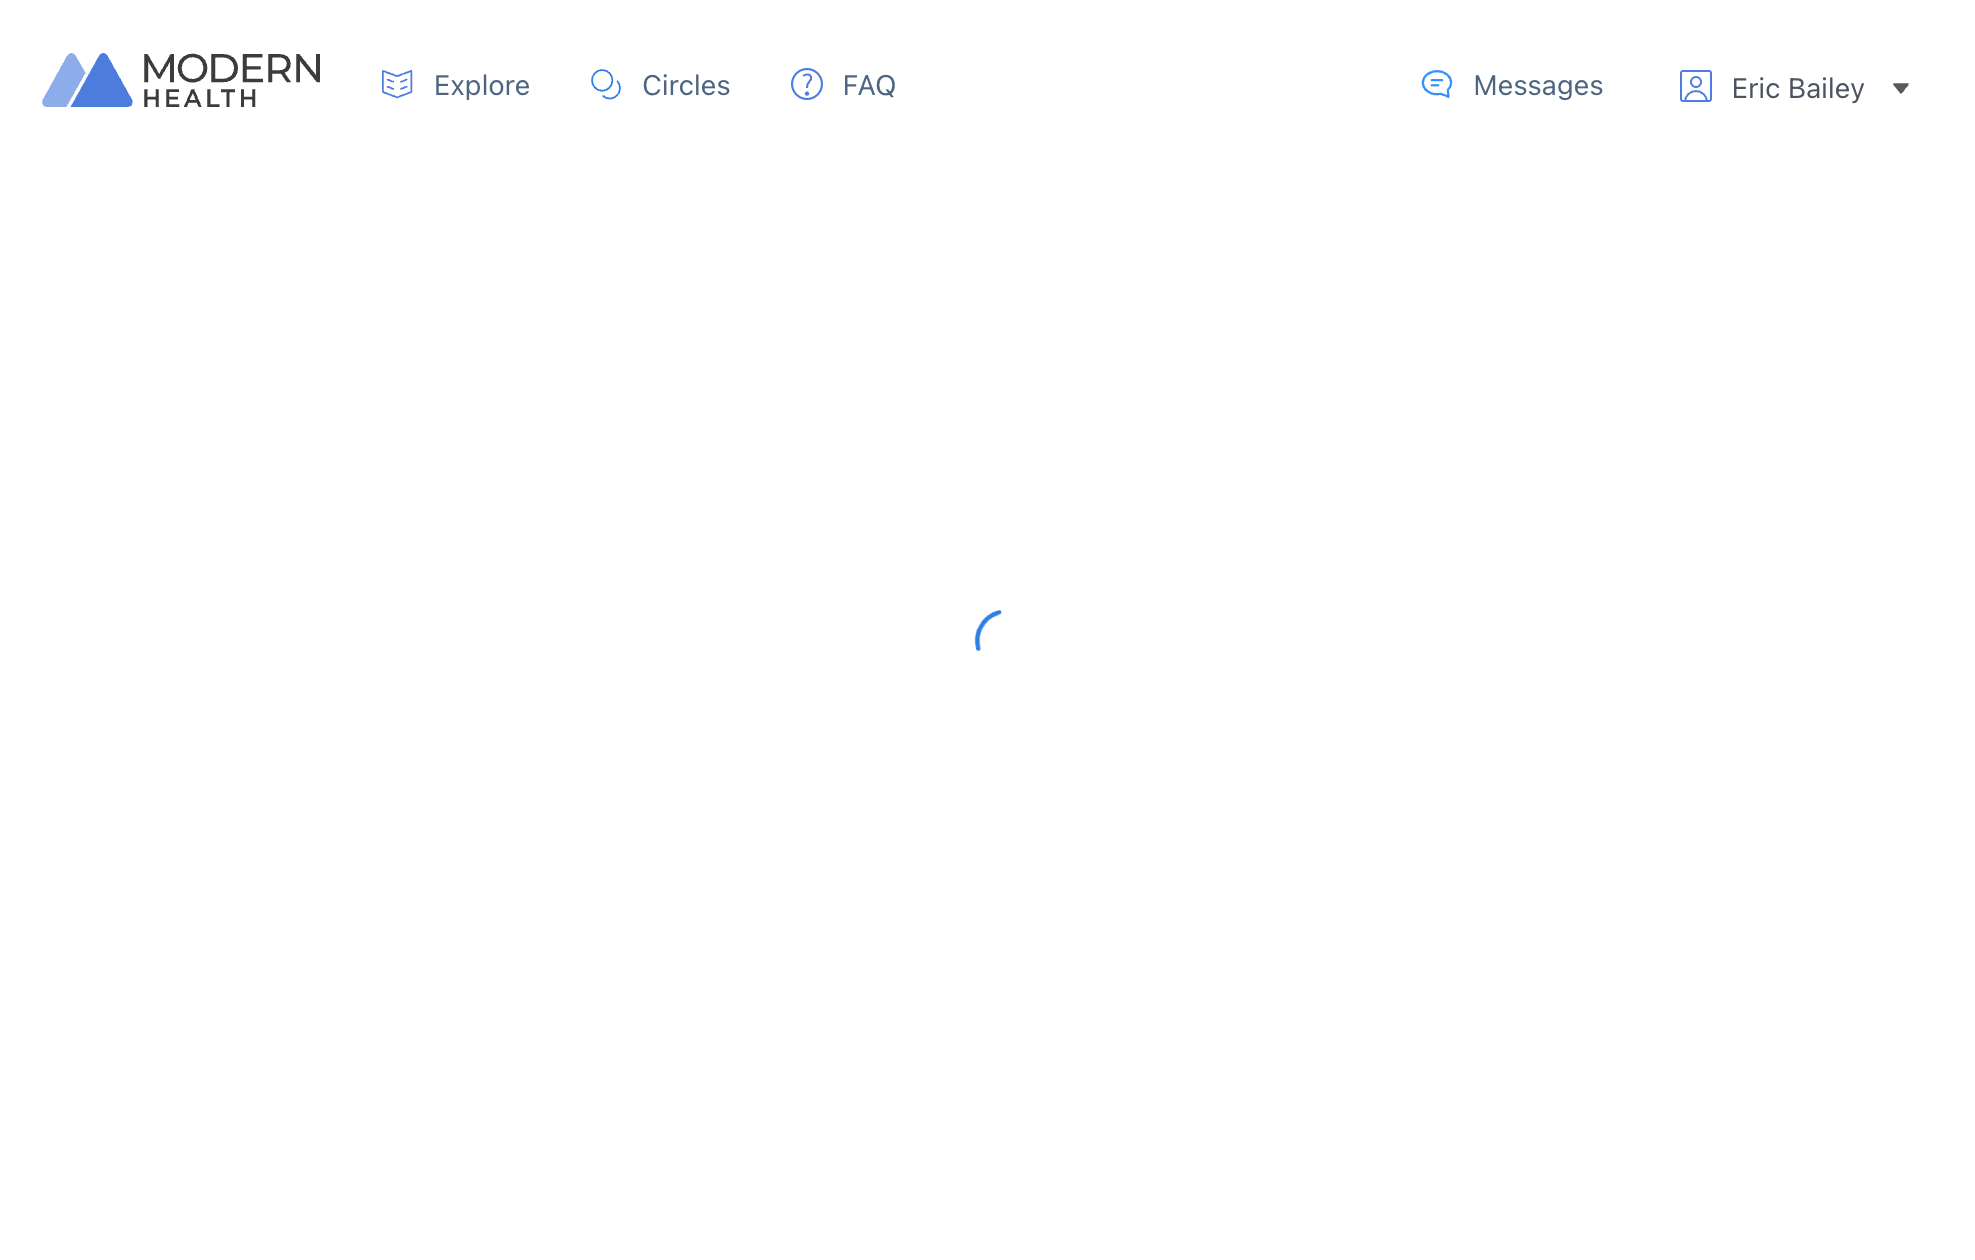 An almost entirely blank white screen. In the top lefthand corner is the Modern Health log, and navigation options for 'Explore', 'Circles', and 'FAQ'. On the top righthand corner is navigation options for 'Messages' and my profile. In the center of the screen is a small loading spinner. Screenshot.